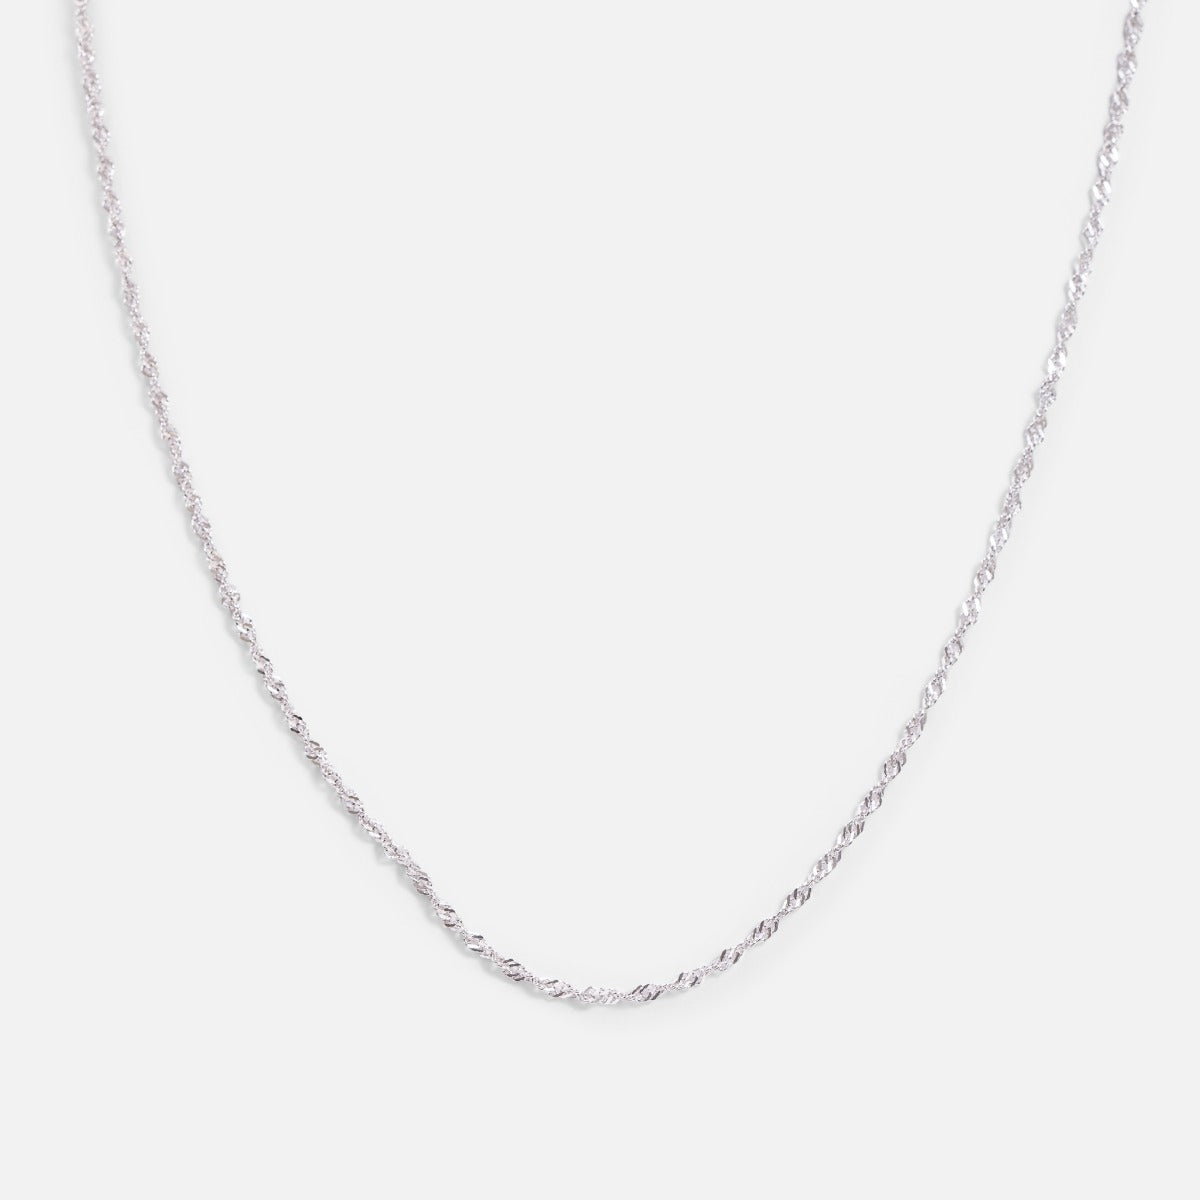 Sterling silver chain with twisted links 22 inches